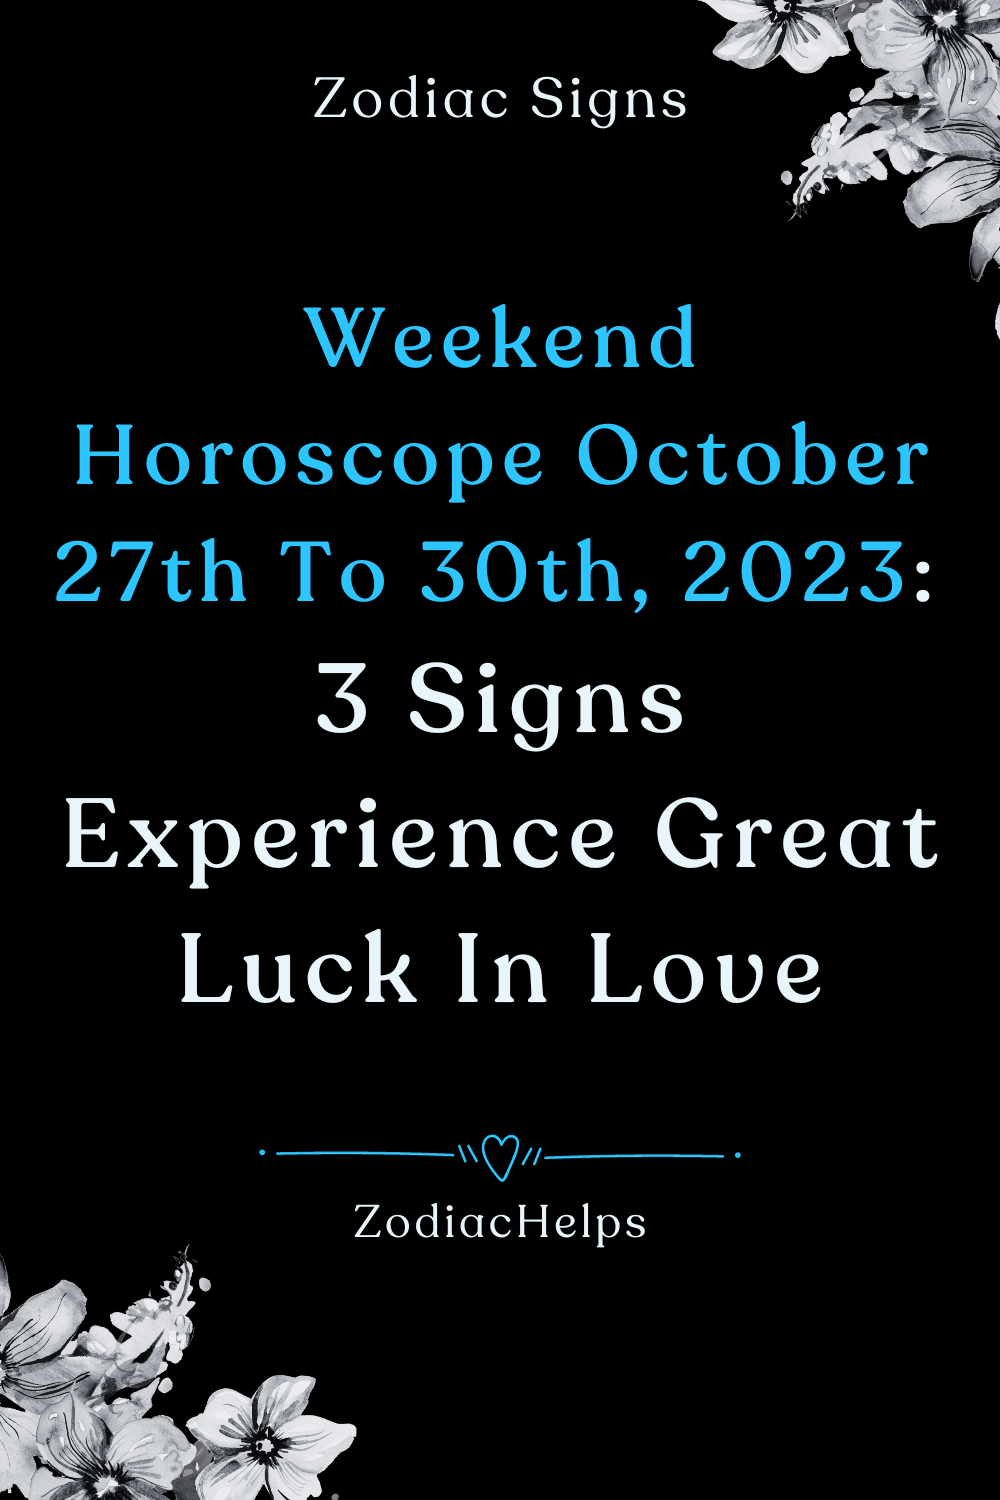 Weekend Horoscope October 27th To 30th, 2023: 3 Signs Experience Great Luck In Love